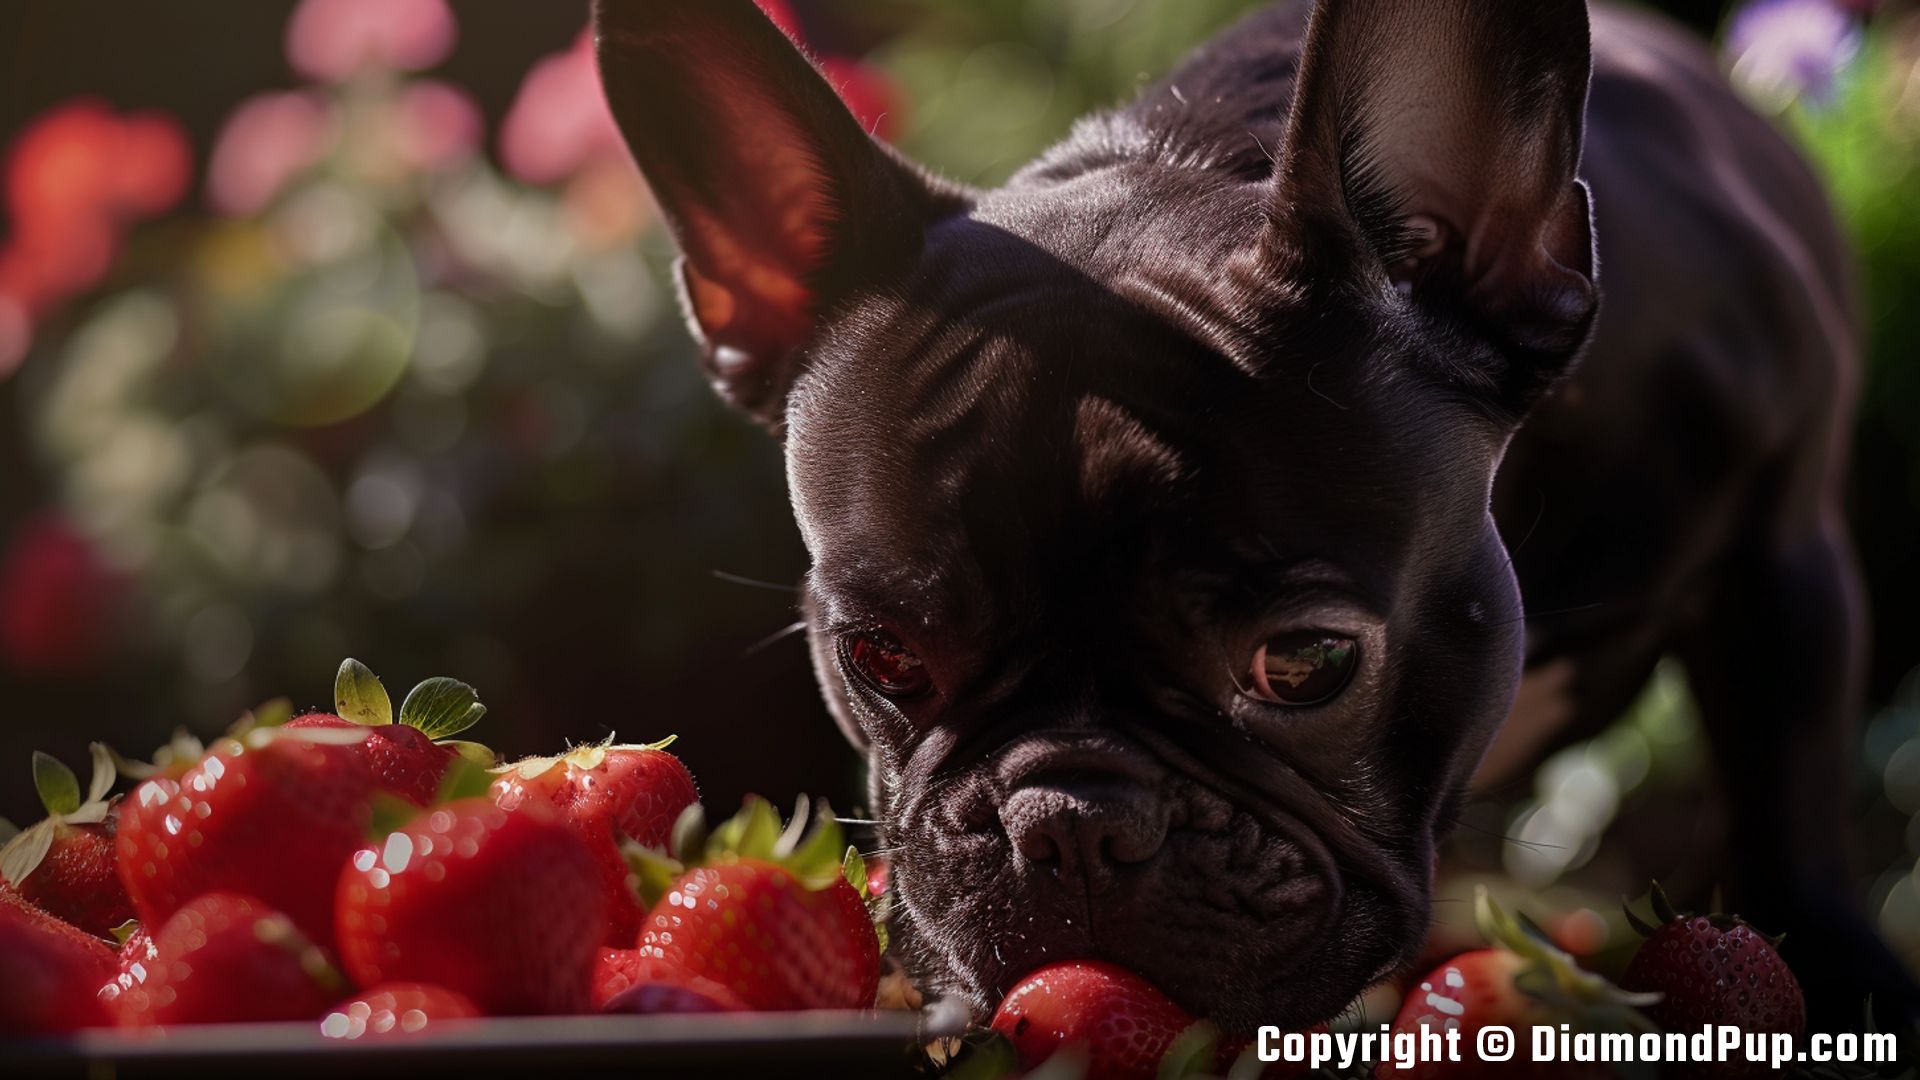 Image of a Playful French Bulldog Eating Strawberries